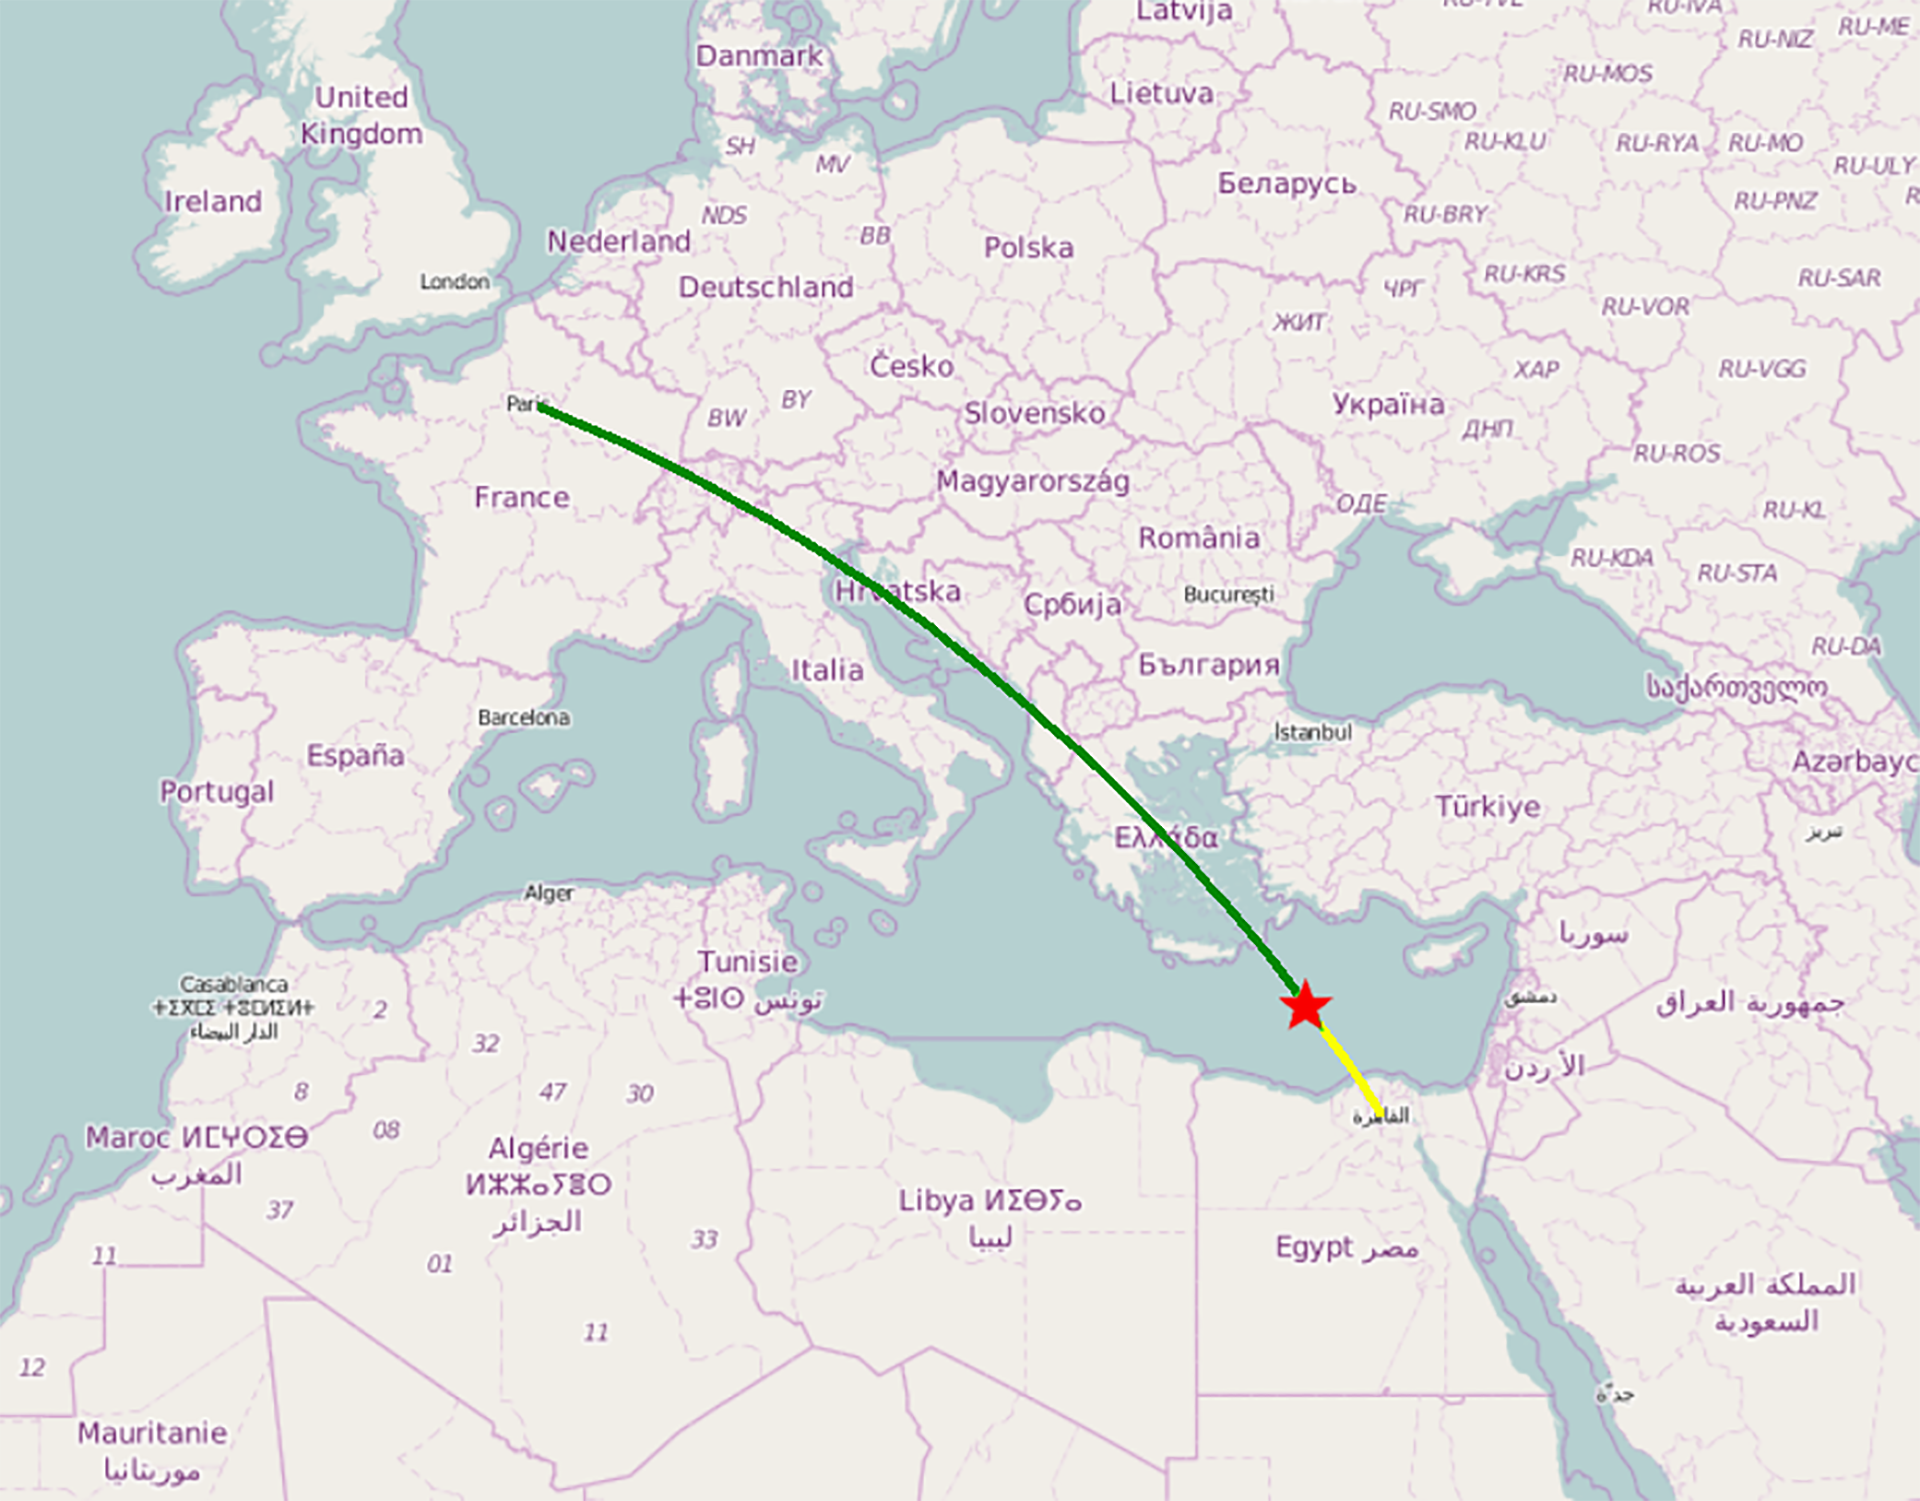 Map of the path taken by MS804 until it disappeared from radar and fell into the Mediterranean Sea, the red star marks the site of the accident, while the green route is the route it had already traveled , and yellow is what was missing